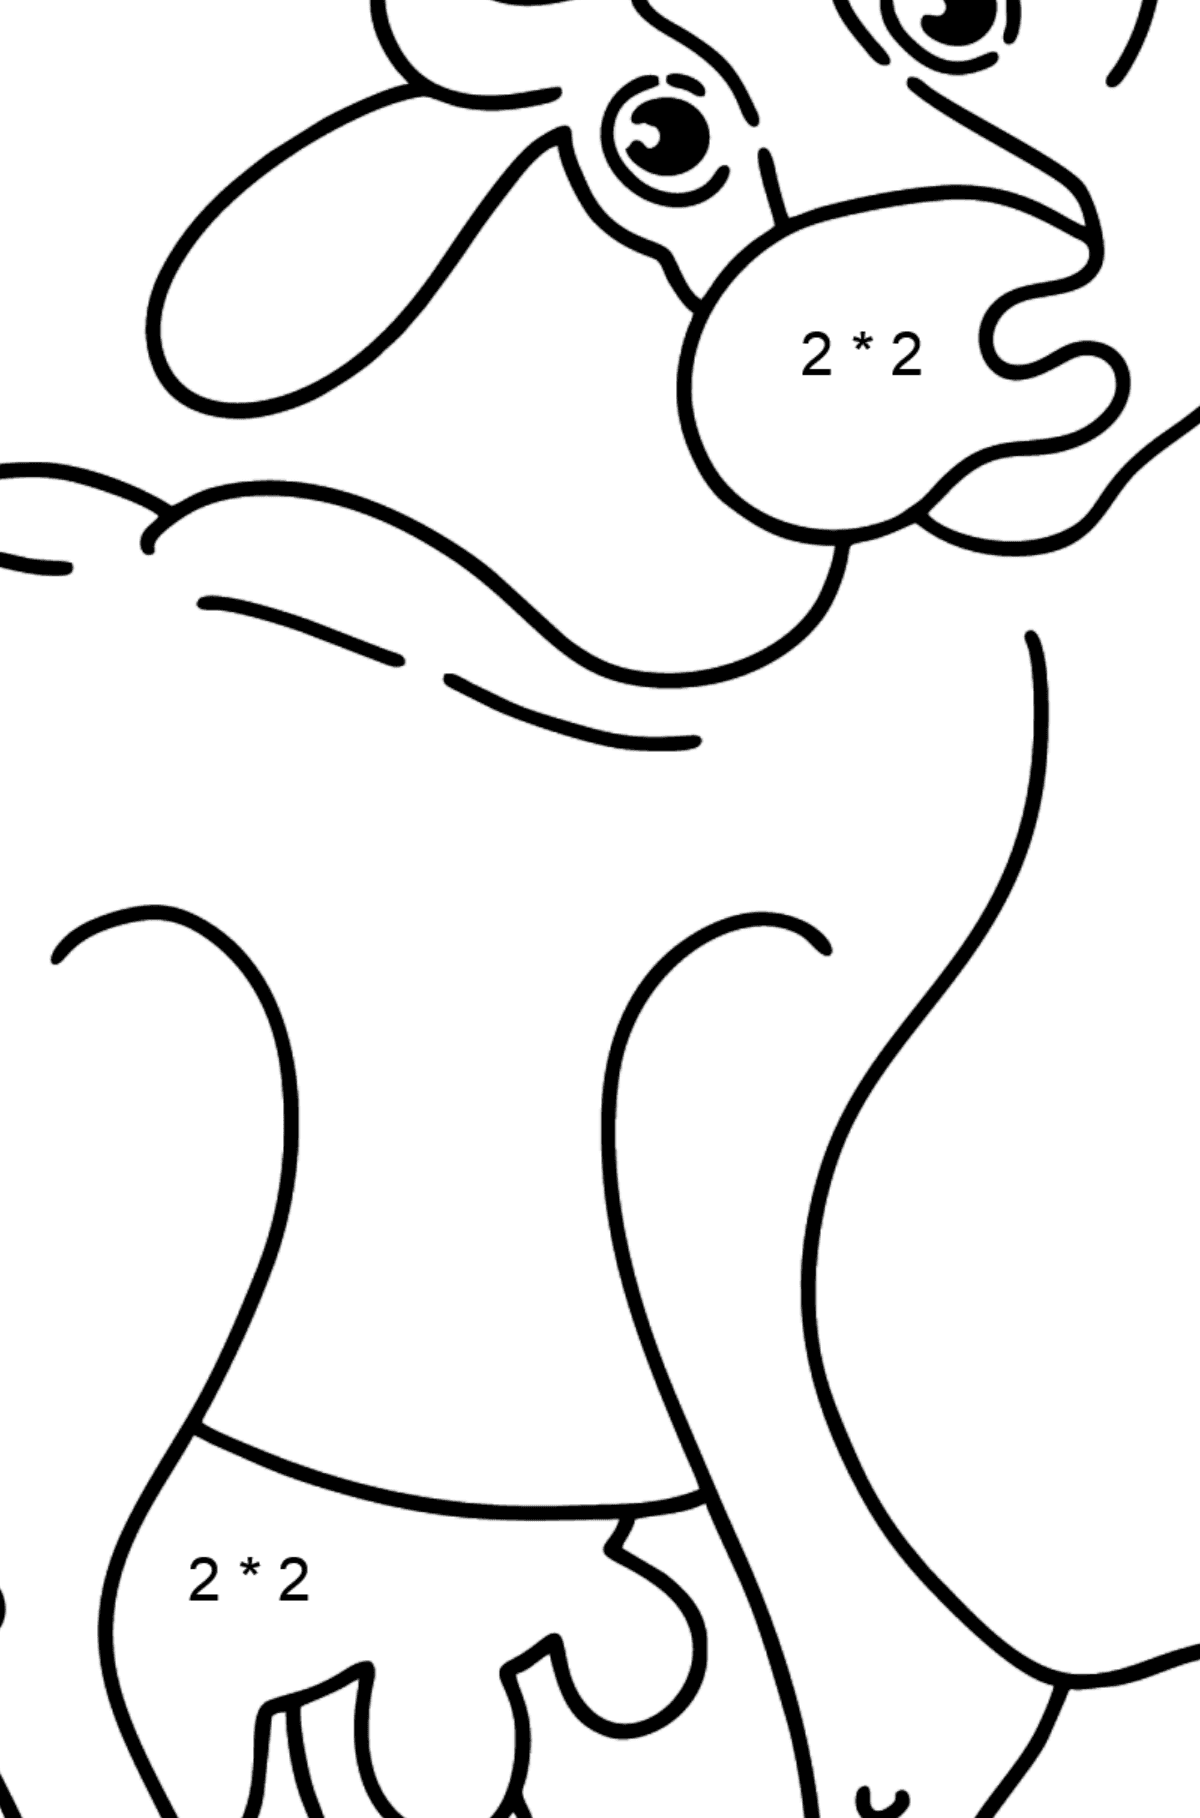 Cow coloring page - Math Coloring - Multiplication for Kids